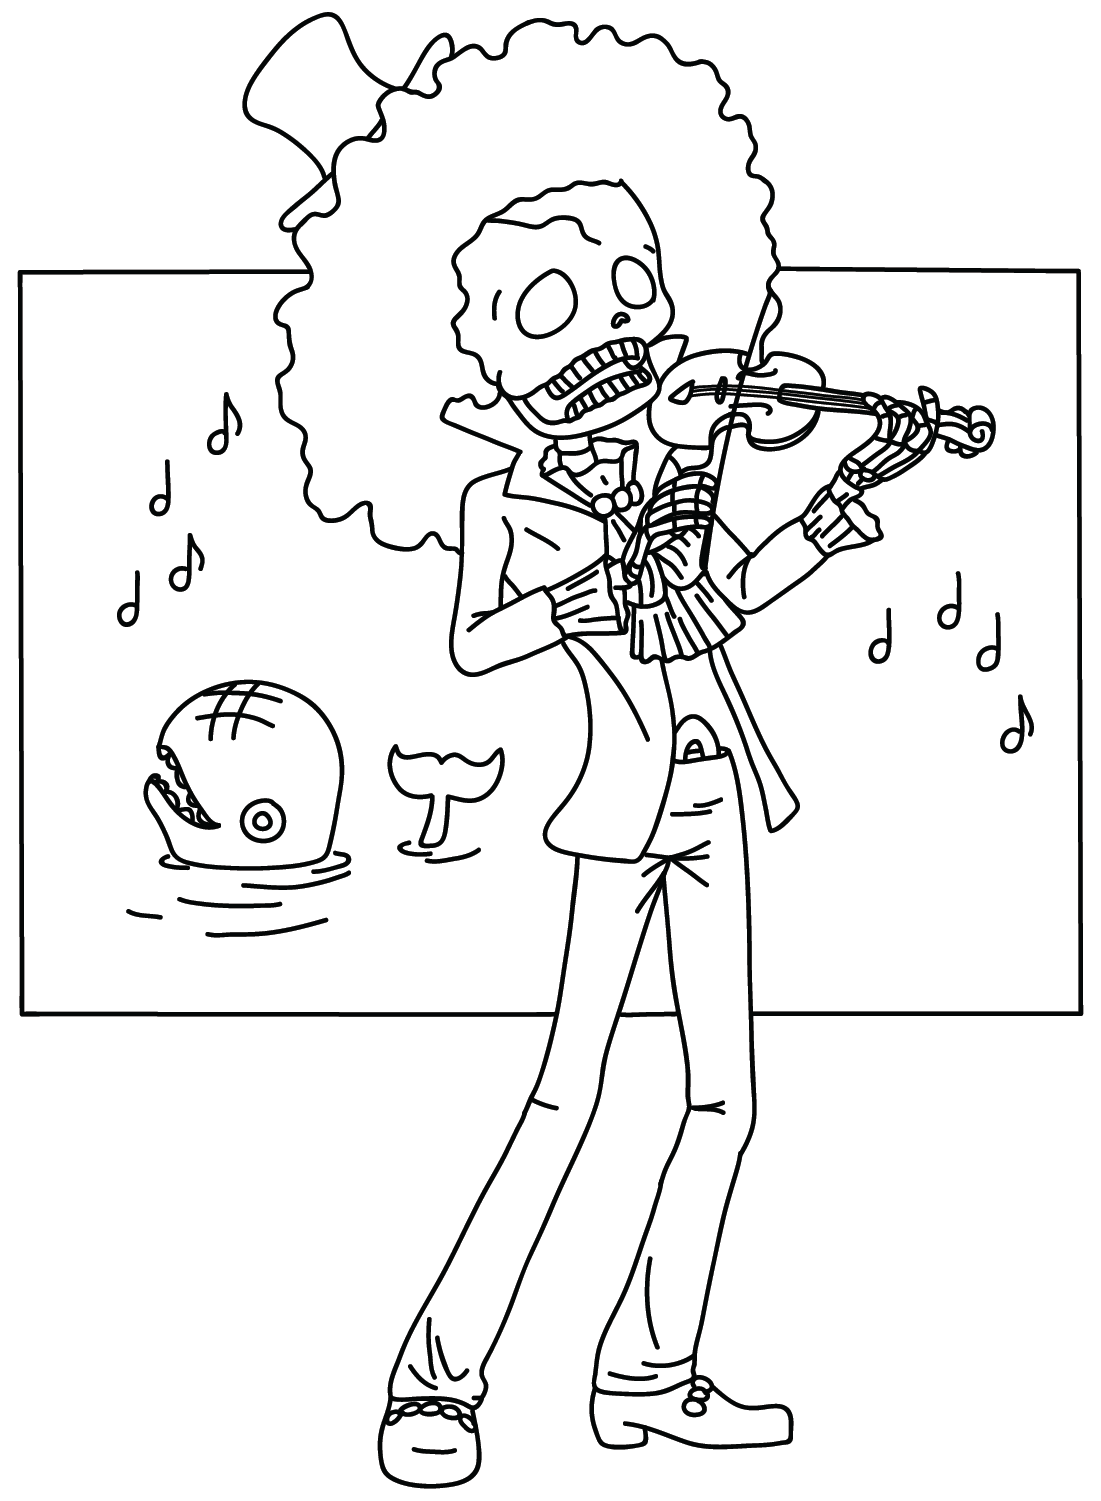 Brook Coloring Page Free - Free Printable Coloring Pages